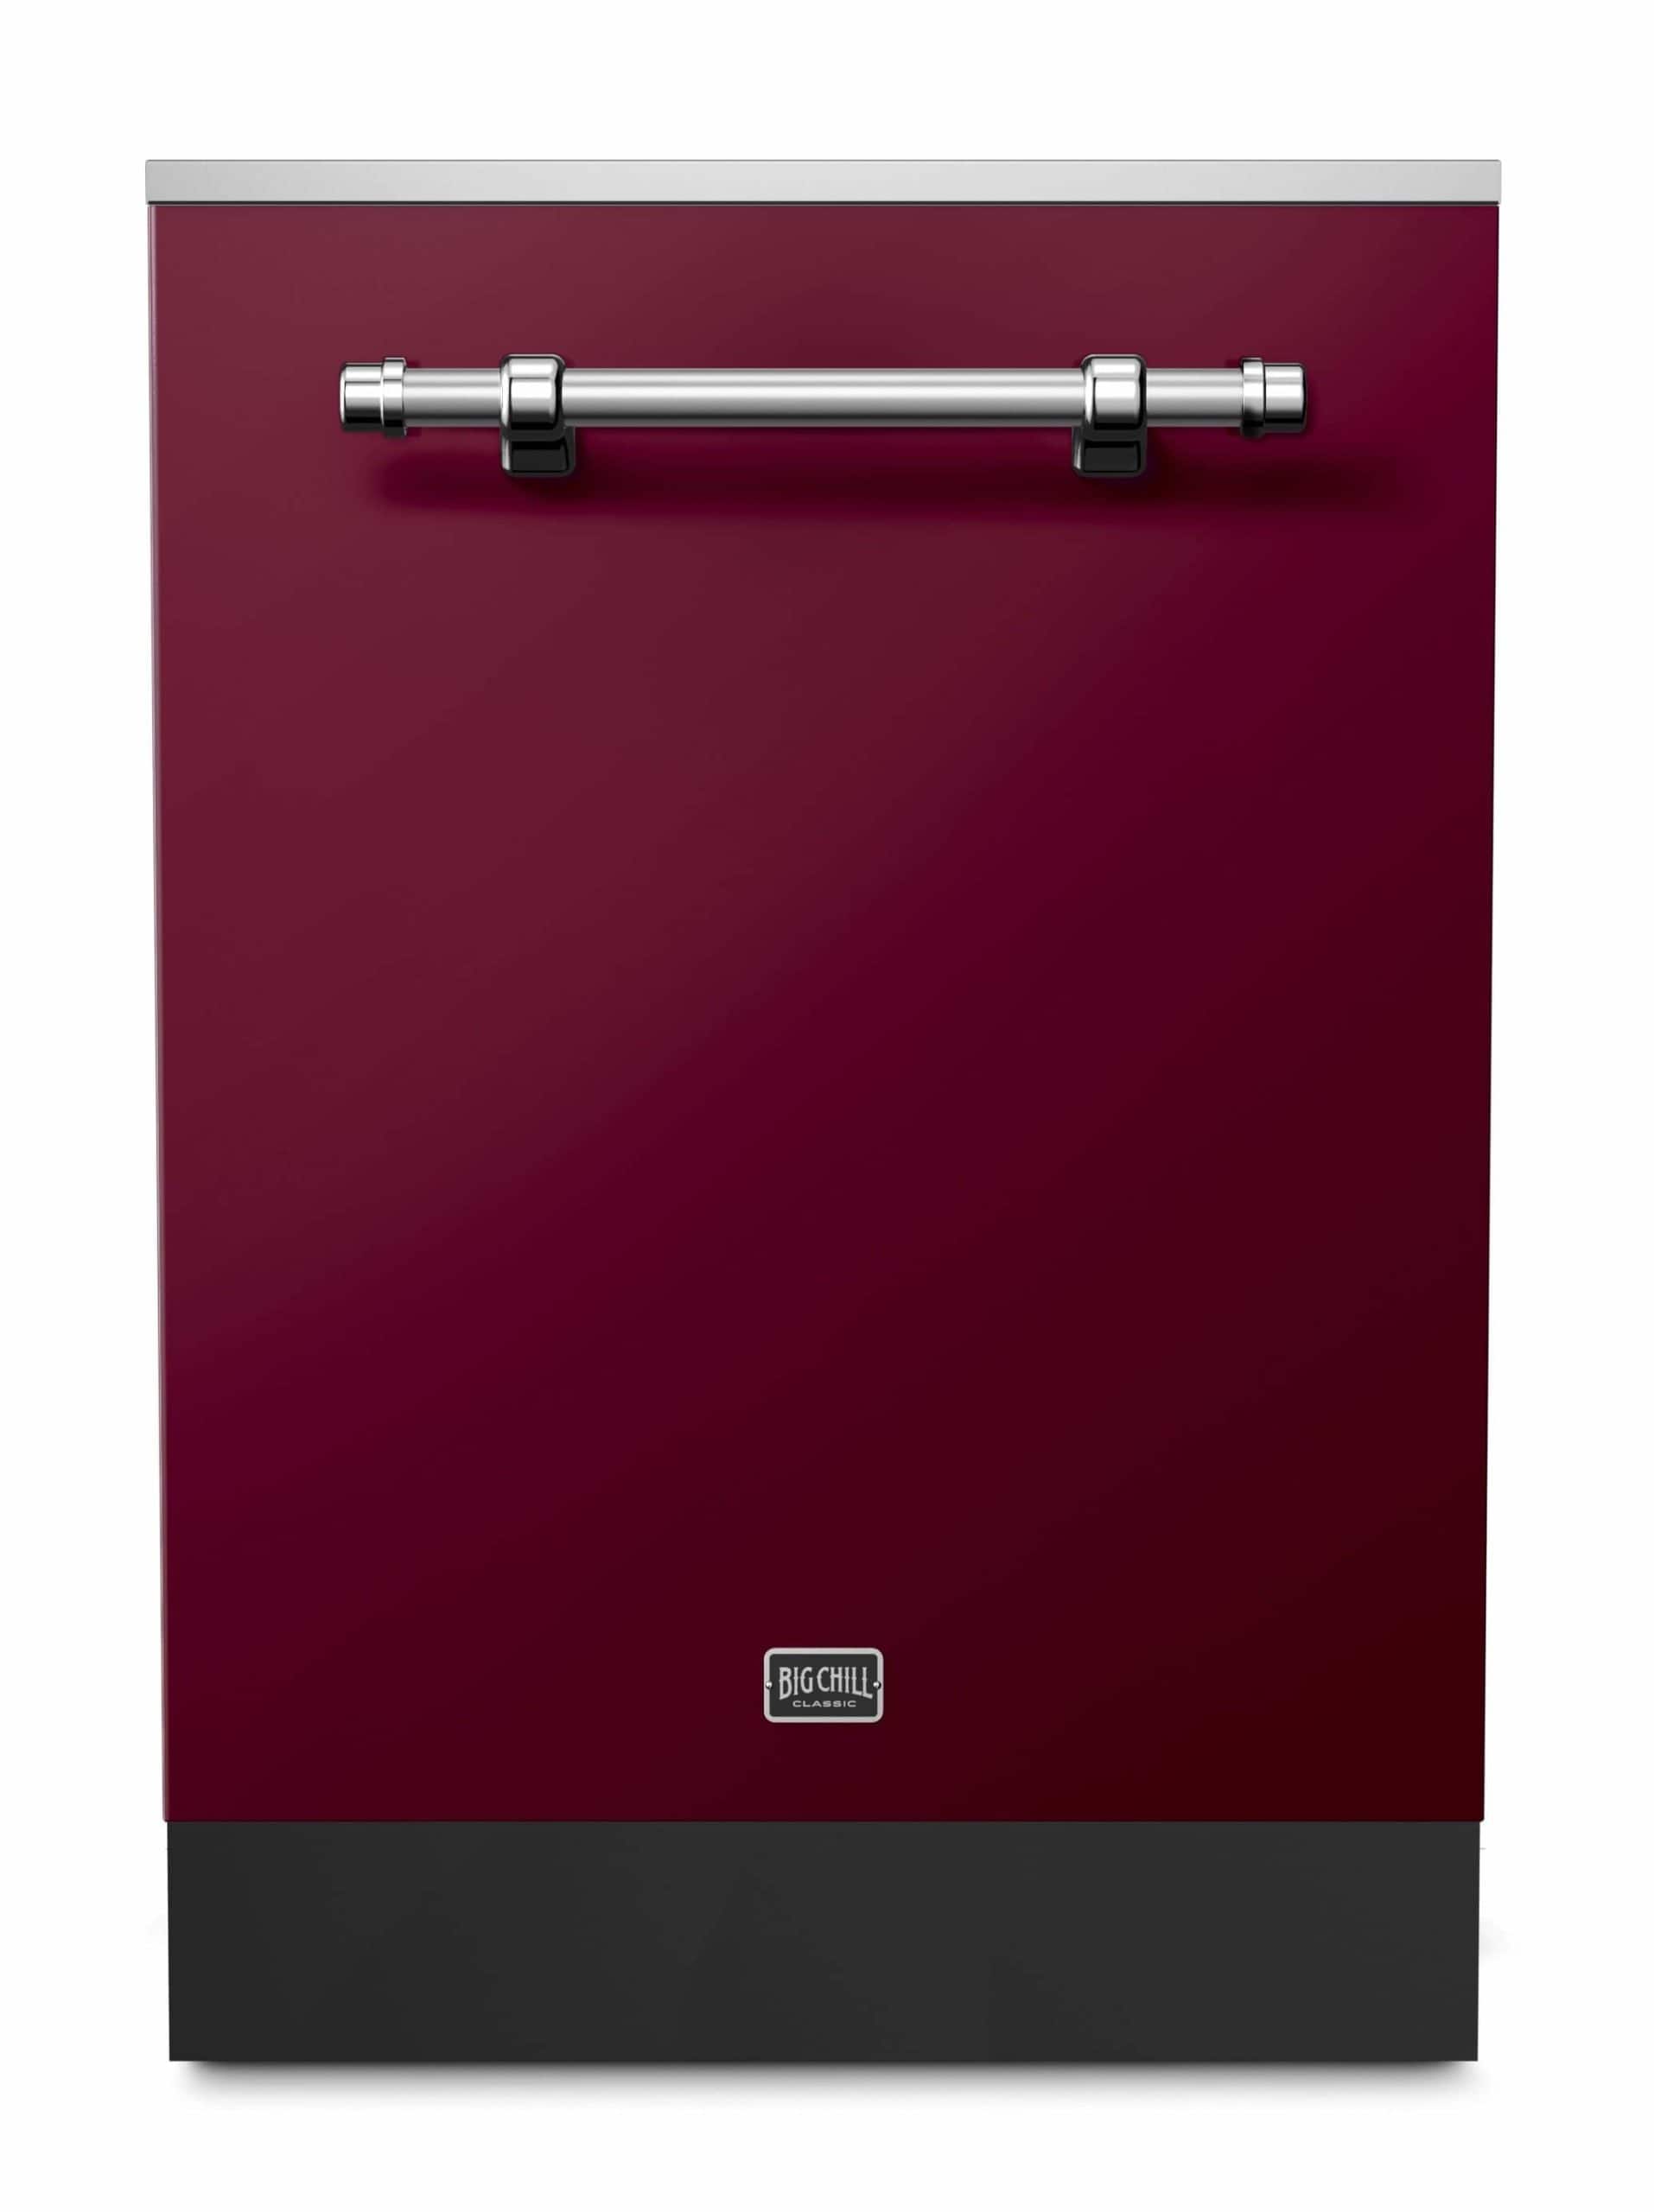 Big Chill Classic Cabernet Dishwasher with Chrome